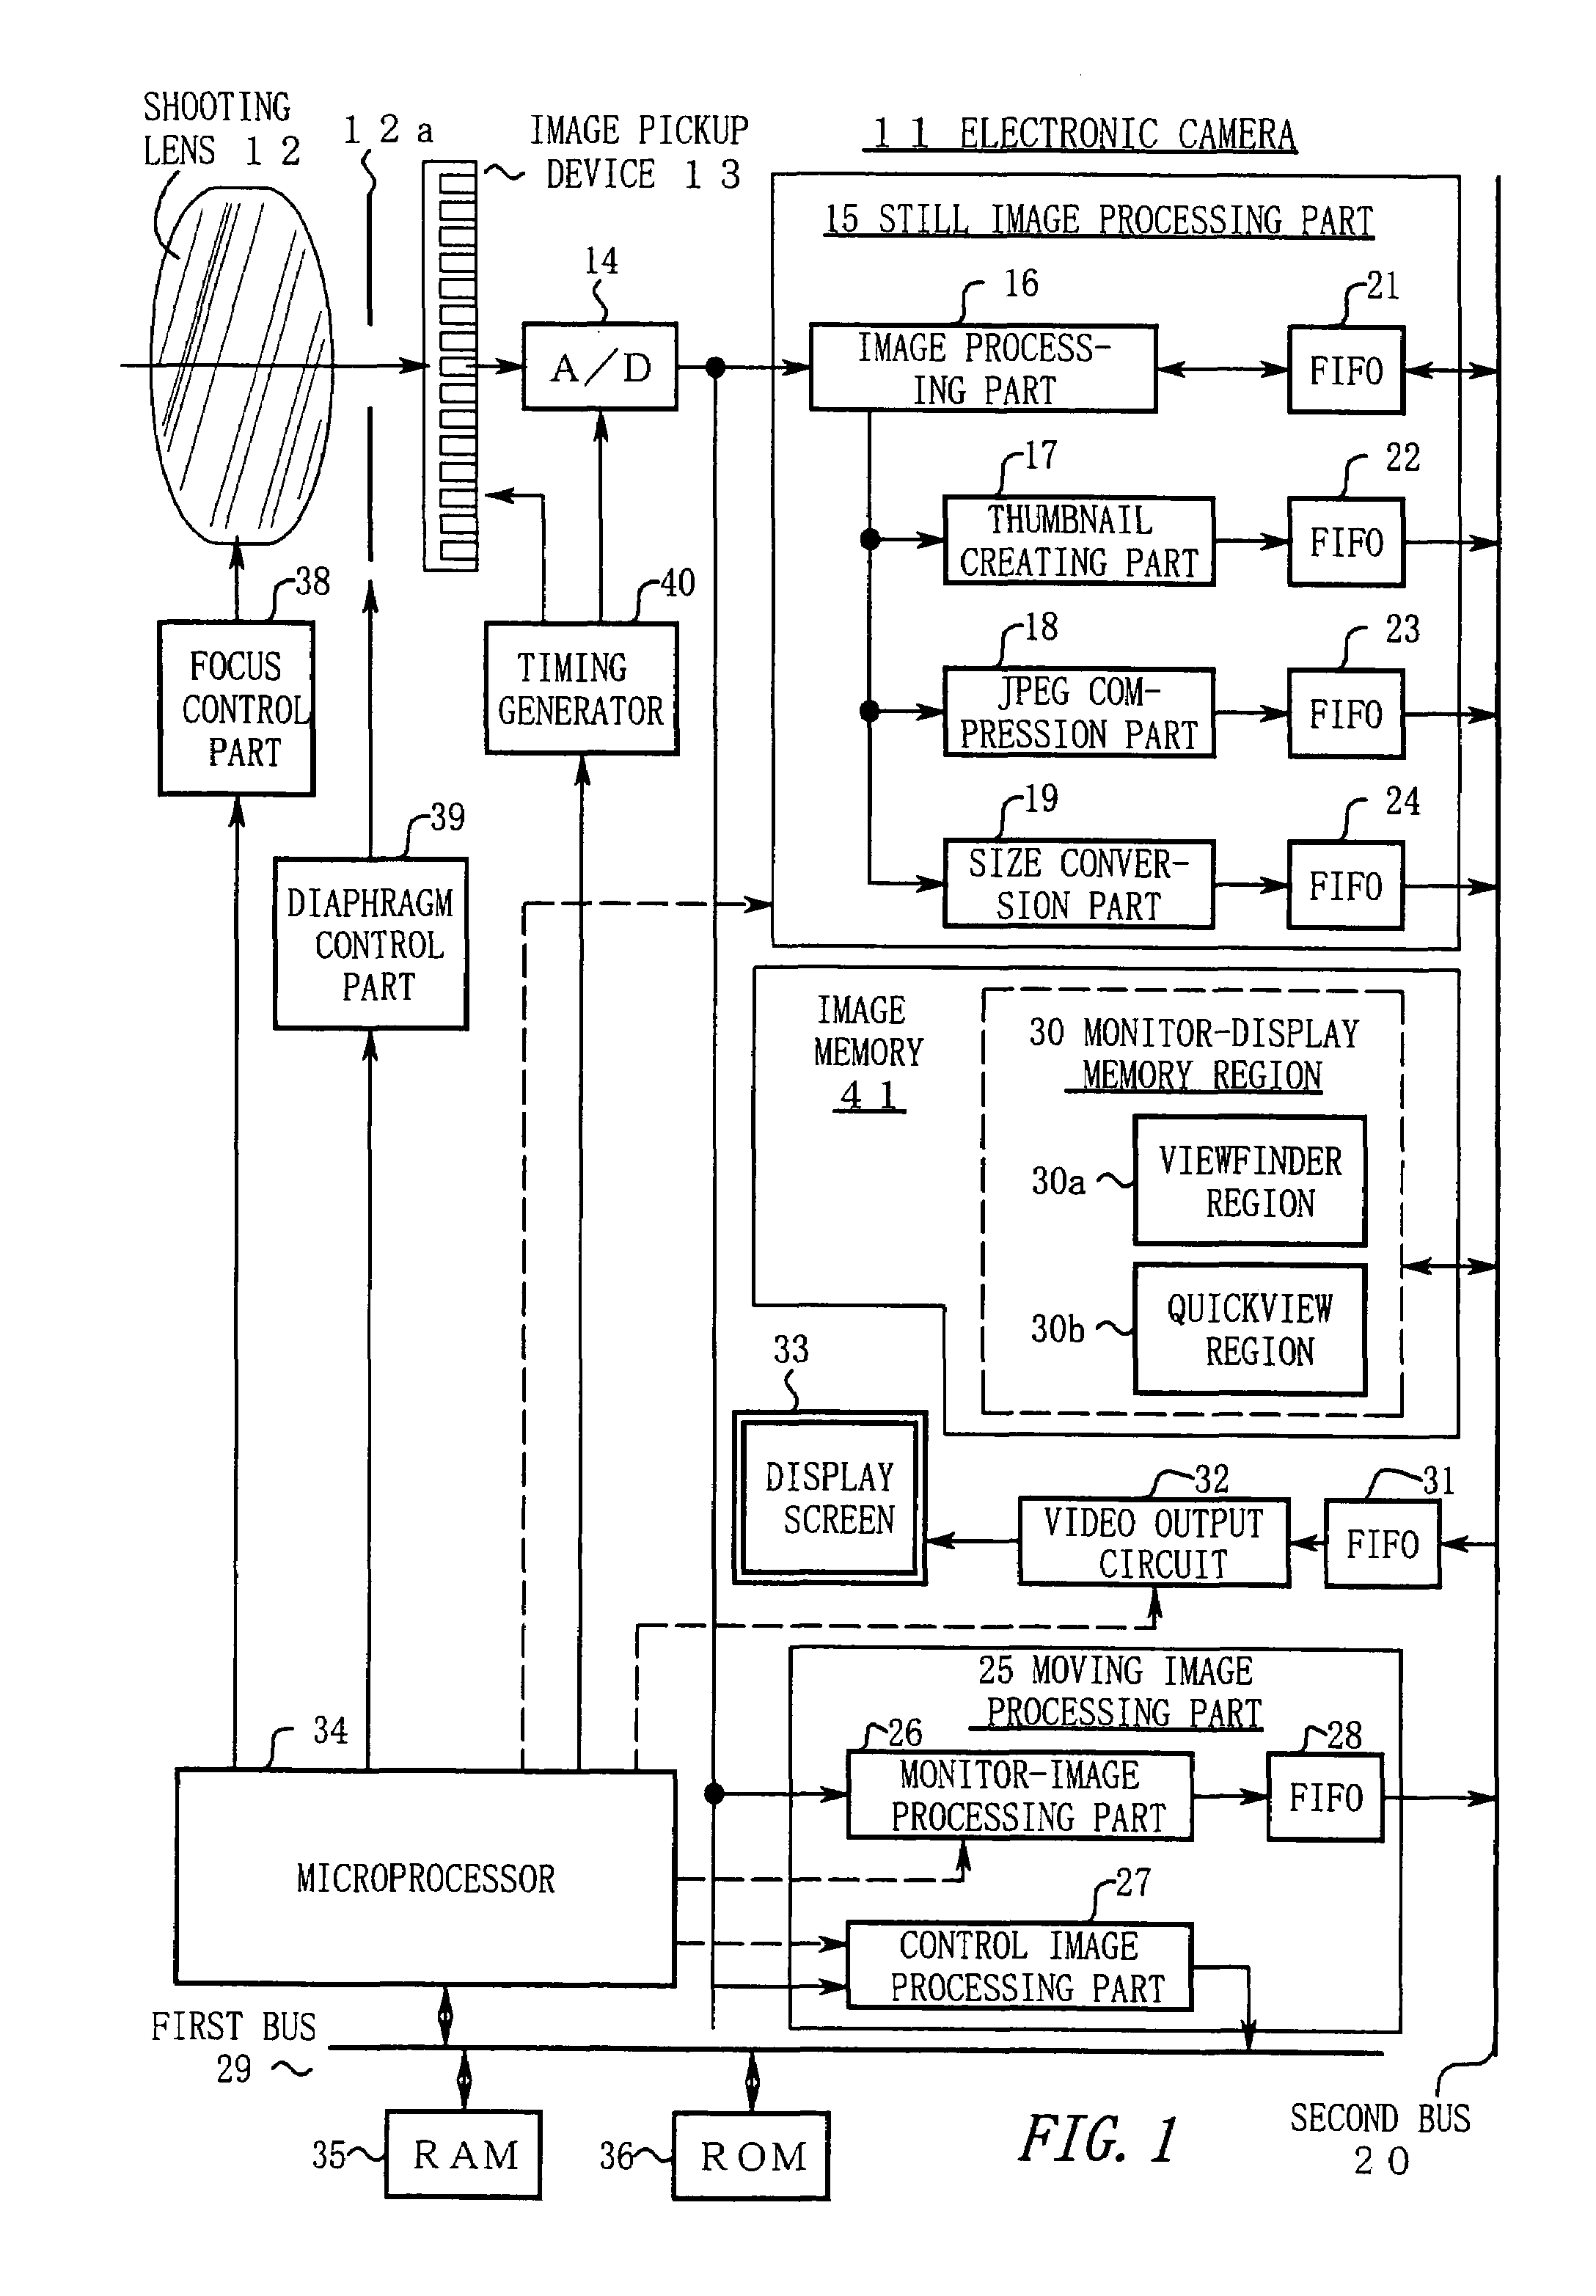 Electronic camera for displaying a preview image during still image capture